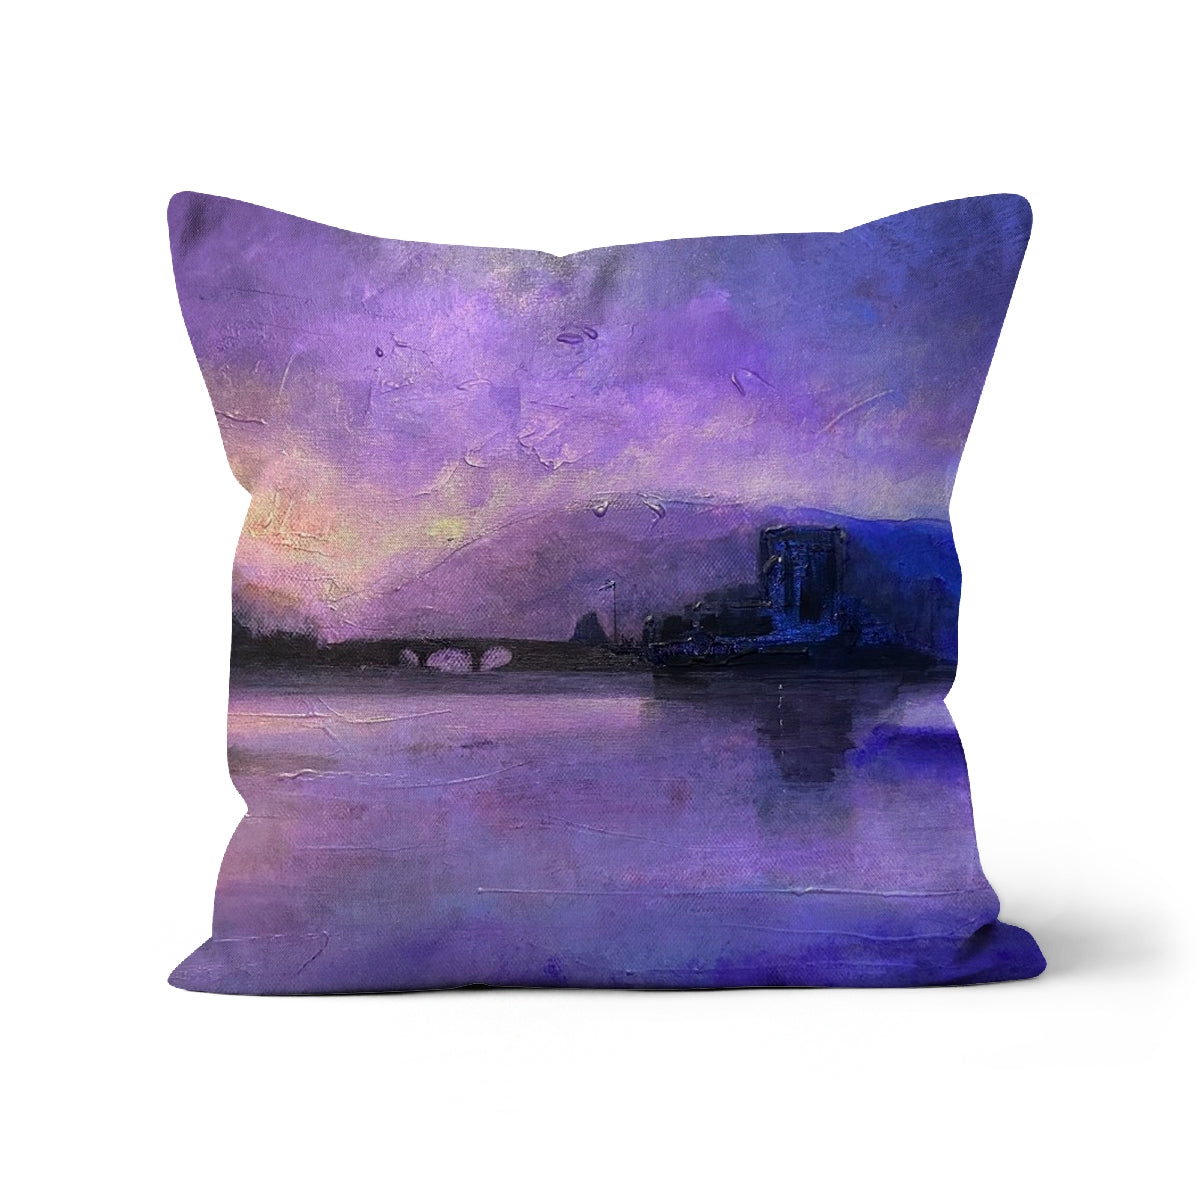 Eilean Donan Castle Moonset Art Gifts Cushion-Cushions-Historic & Iconic Scotland Art Gallery-Faux Suede-18"x18"-Paintings, Prints, Homeware, Art Gifts From Scotland By Scottish Artist Kevin Hunter